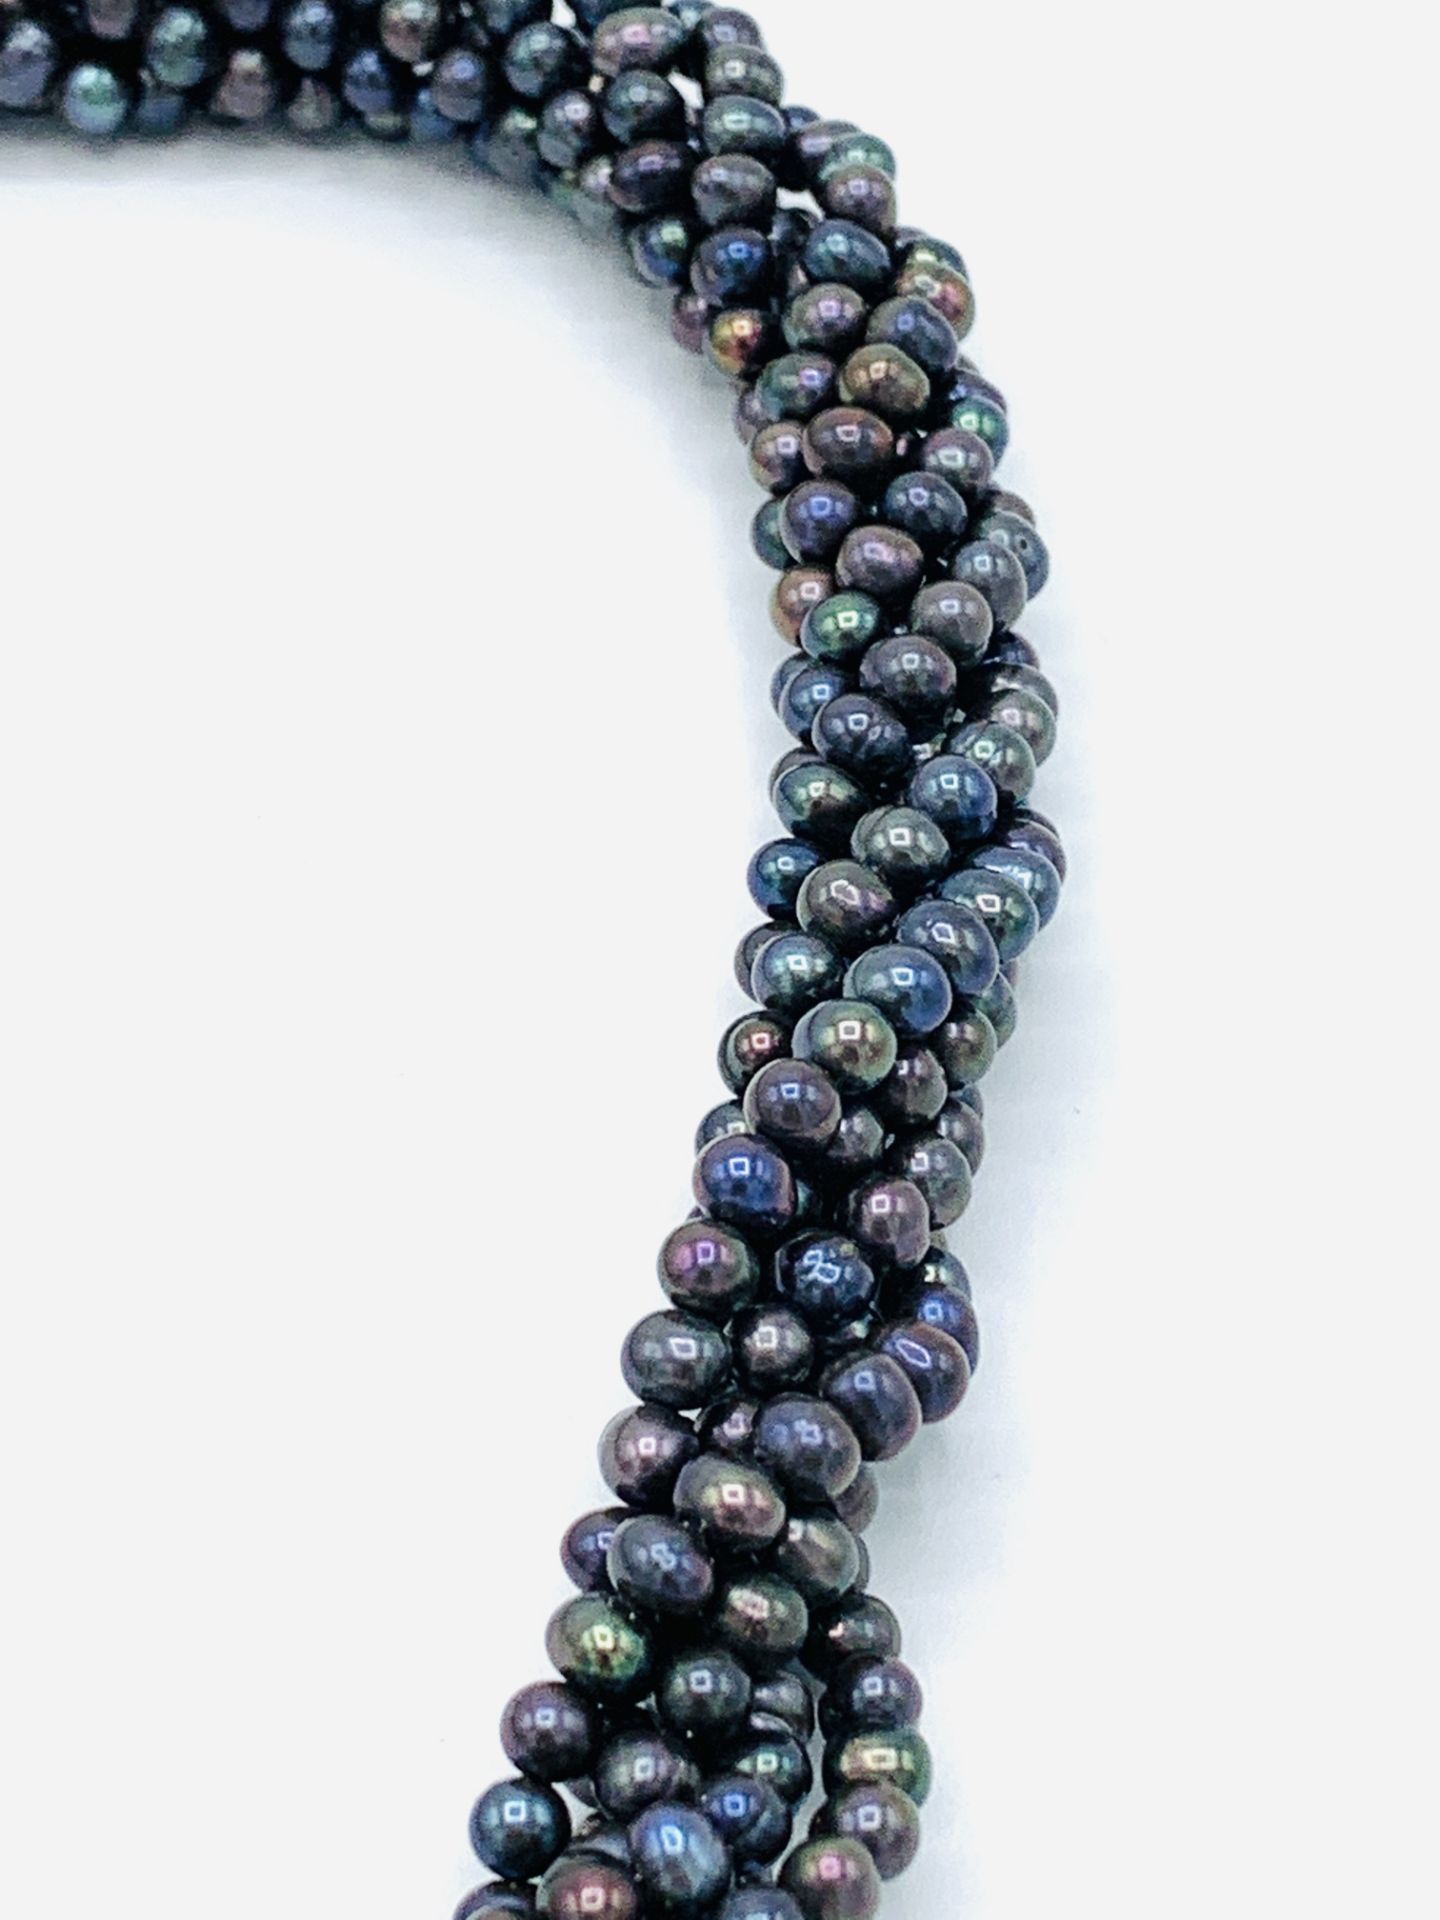 Six strand black Tahitian pearl necklace - Image 4 of 4